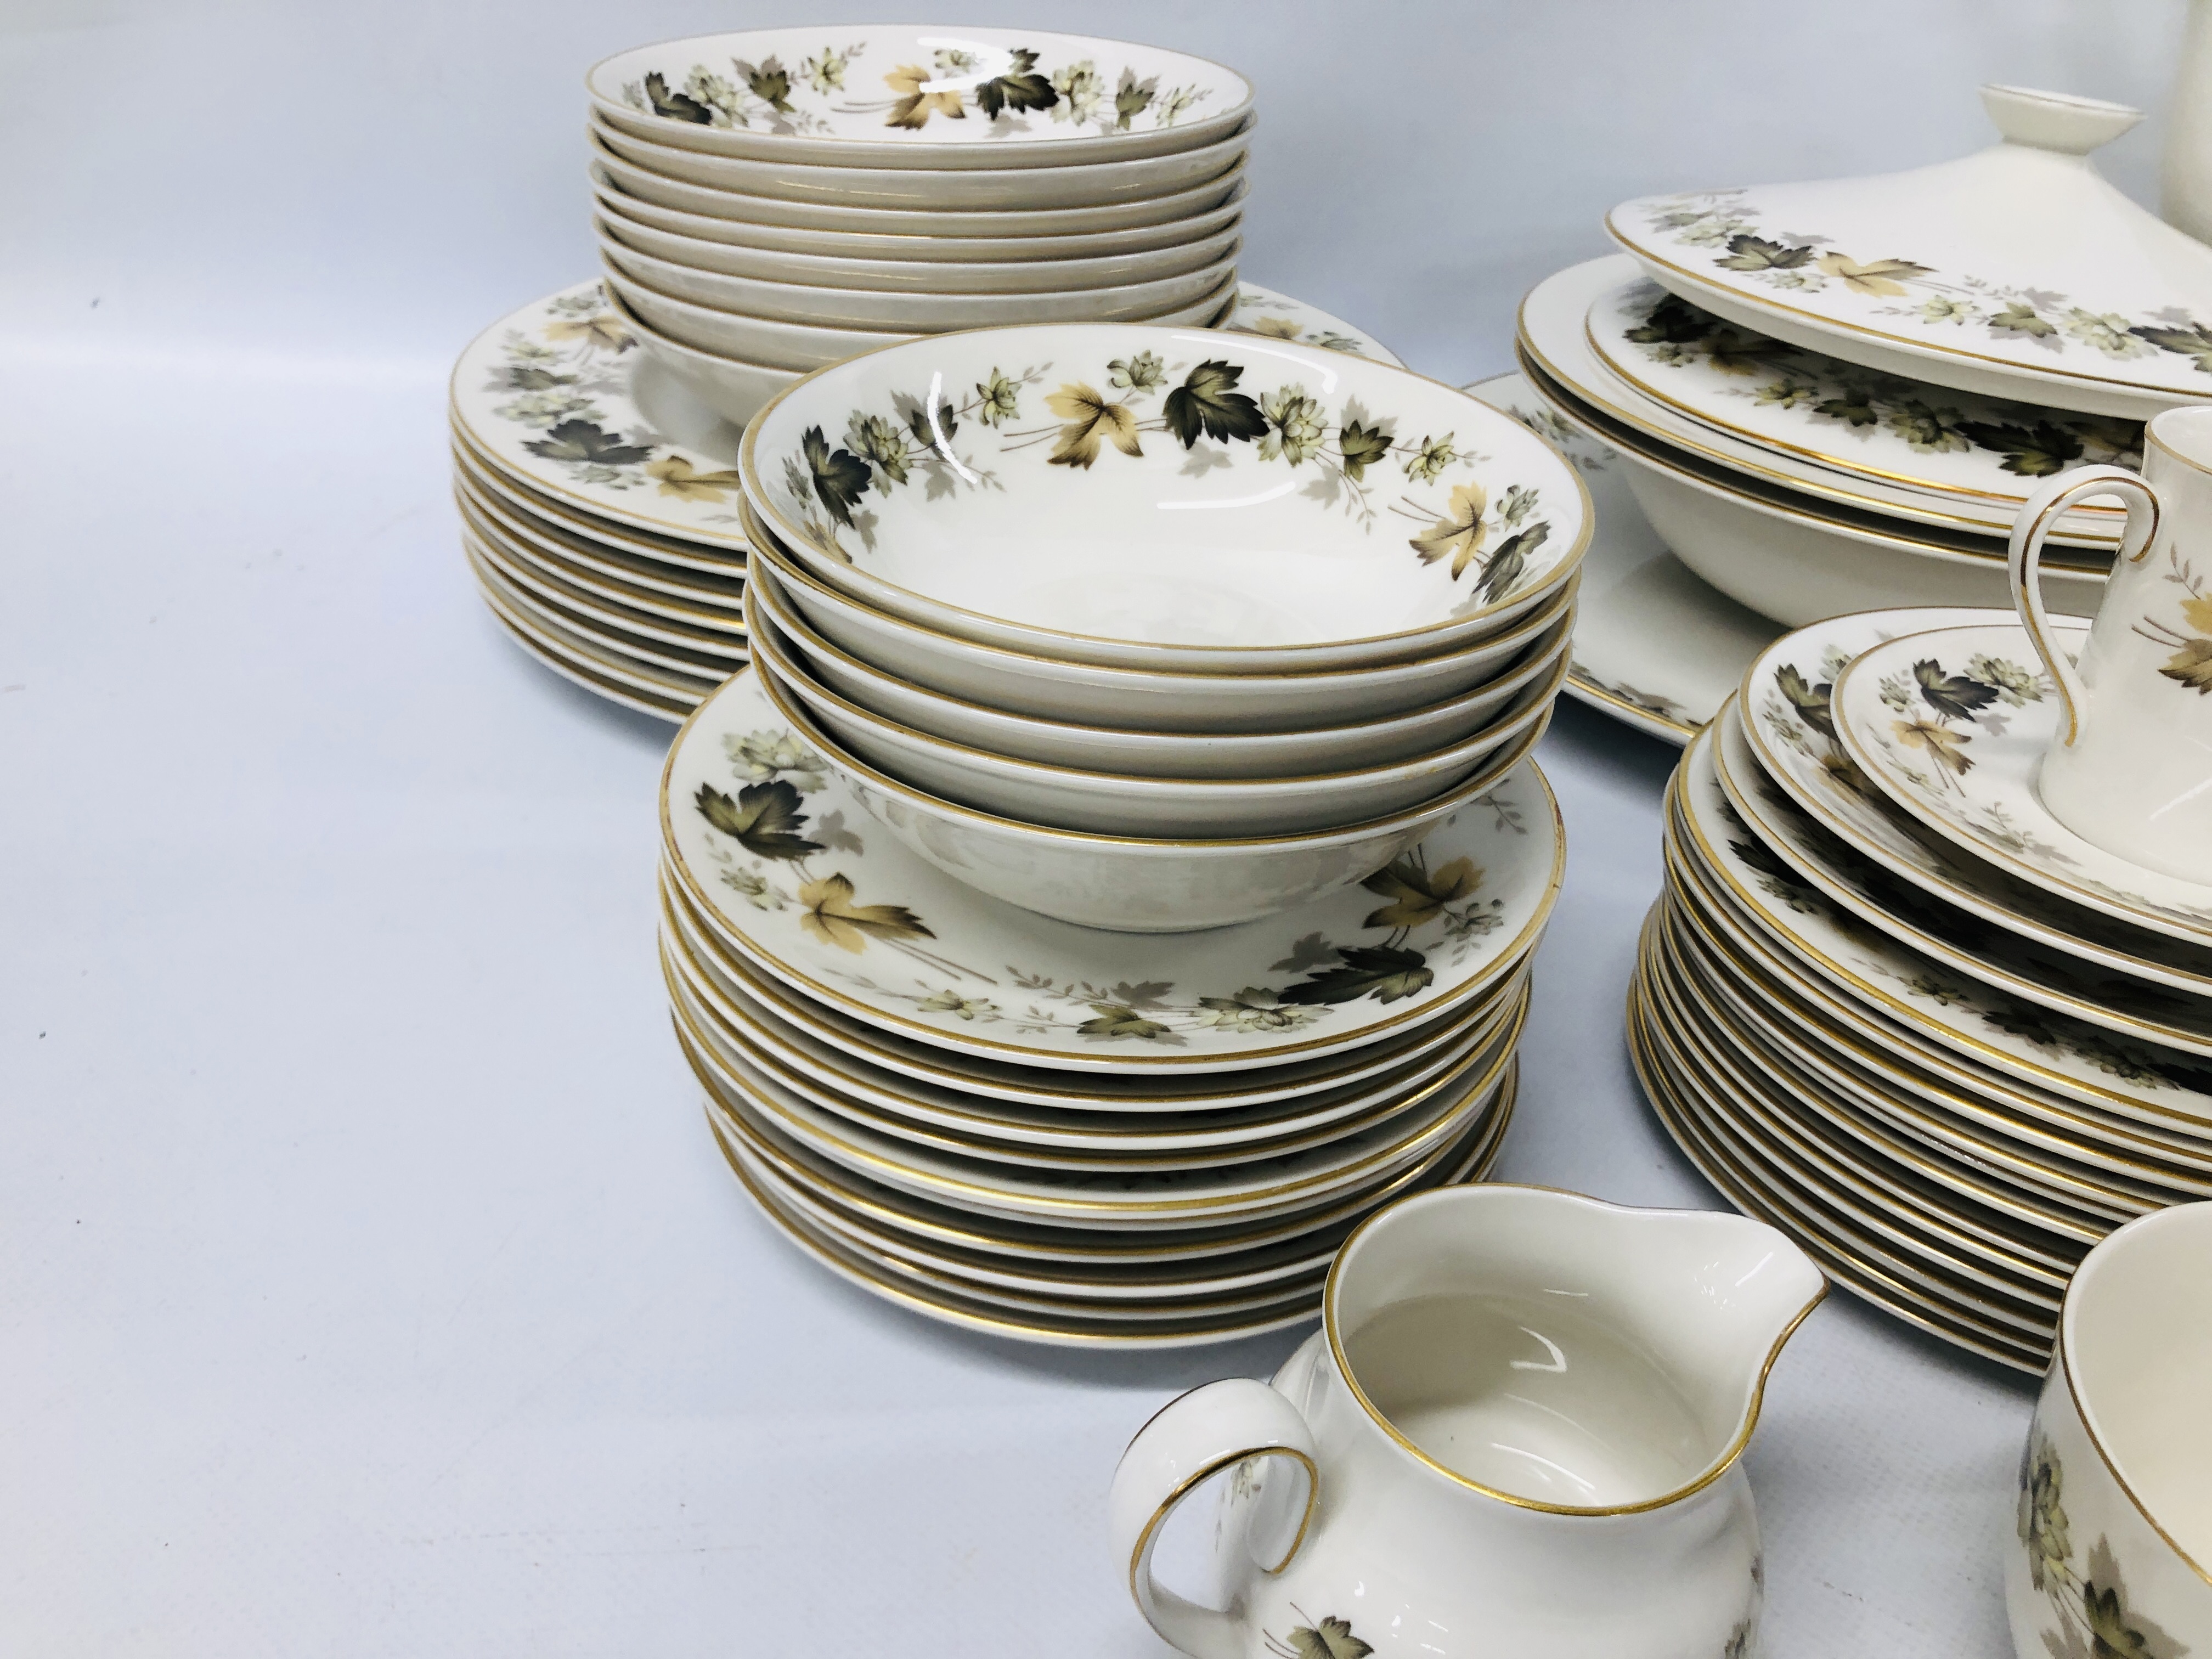 COLLECTION OF ROYAL DOULTON "LARCHMONT" TC1019 TEA AND DINNER WARE (APPROX. - Image 7 of 9